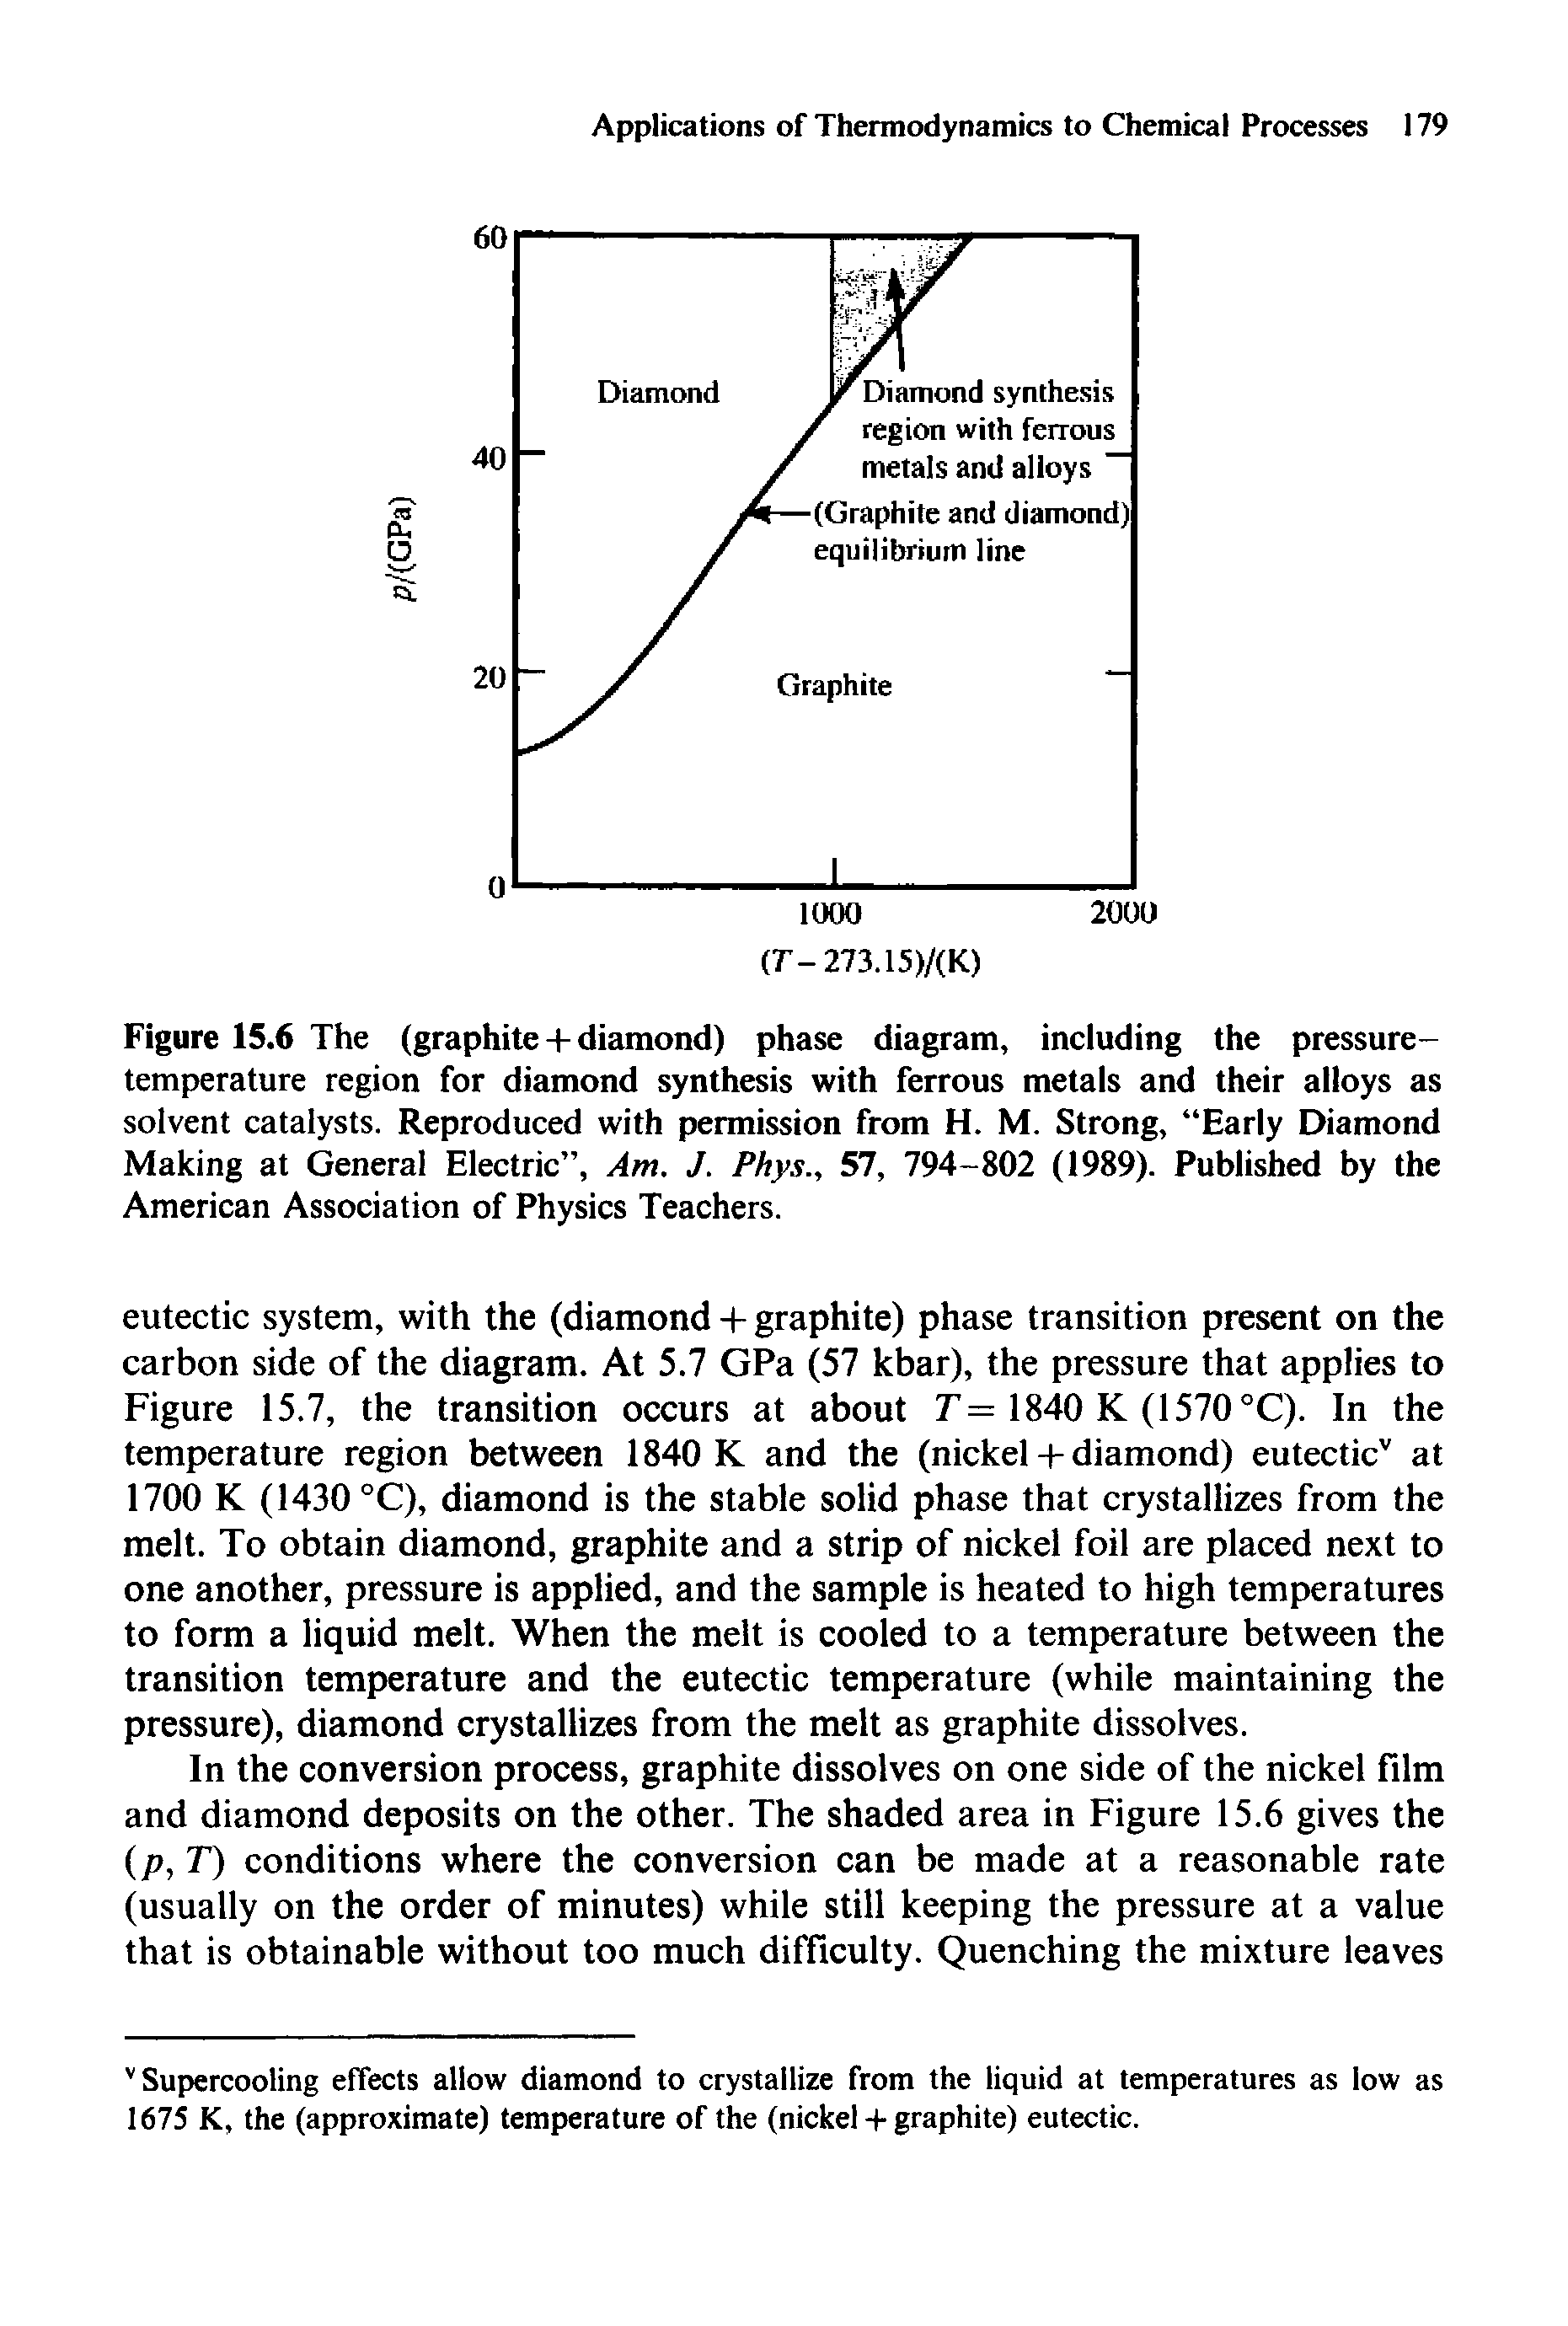 Figure 15.6 The (graphite + diamond) phase diagram, including the pressure-temperature region for diamond synthesis with ferrous metals and their alloys as solvent catalysts. Reproduced with permission from H. M. Strong, Early Diamond Making at General Electric , Am. J. Phys., 57, 794-802 (1989). Published by the American Association of Physics Teachers.